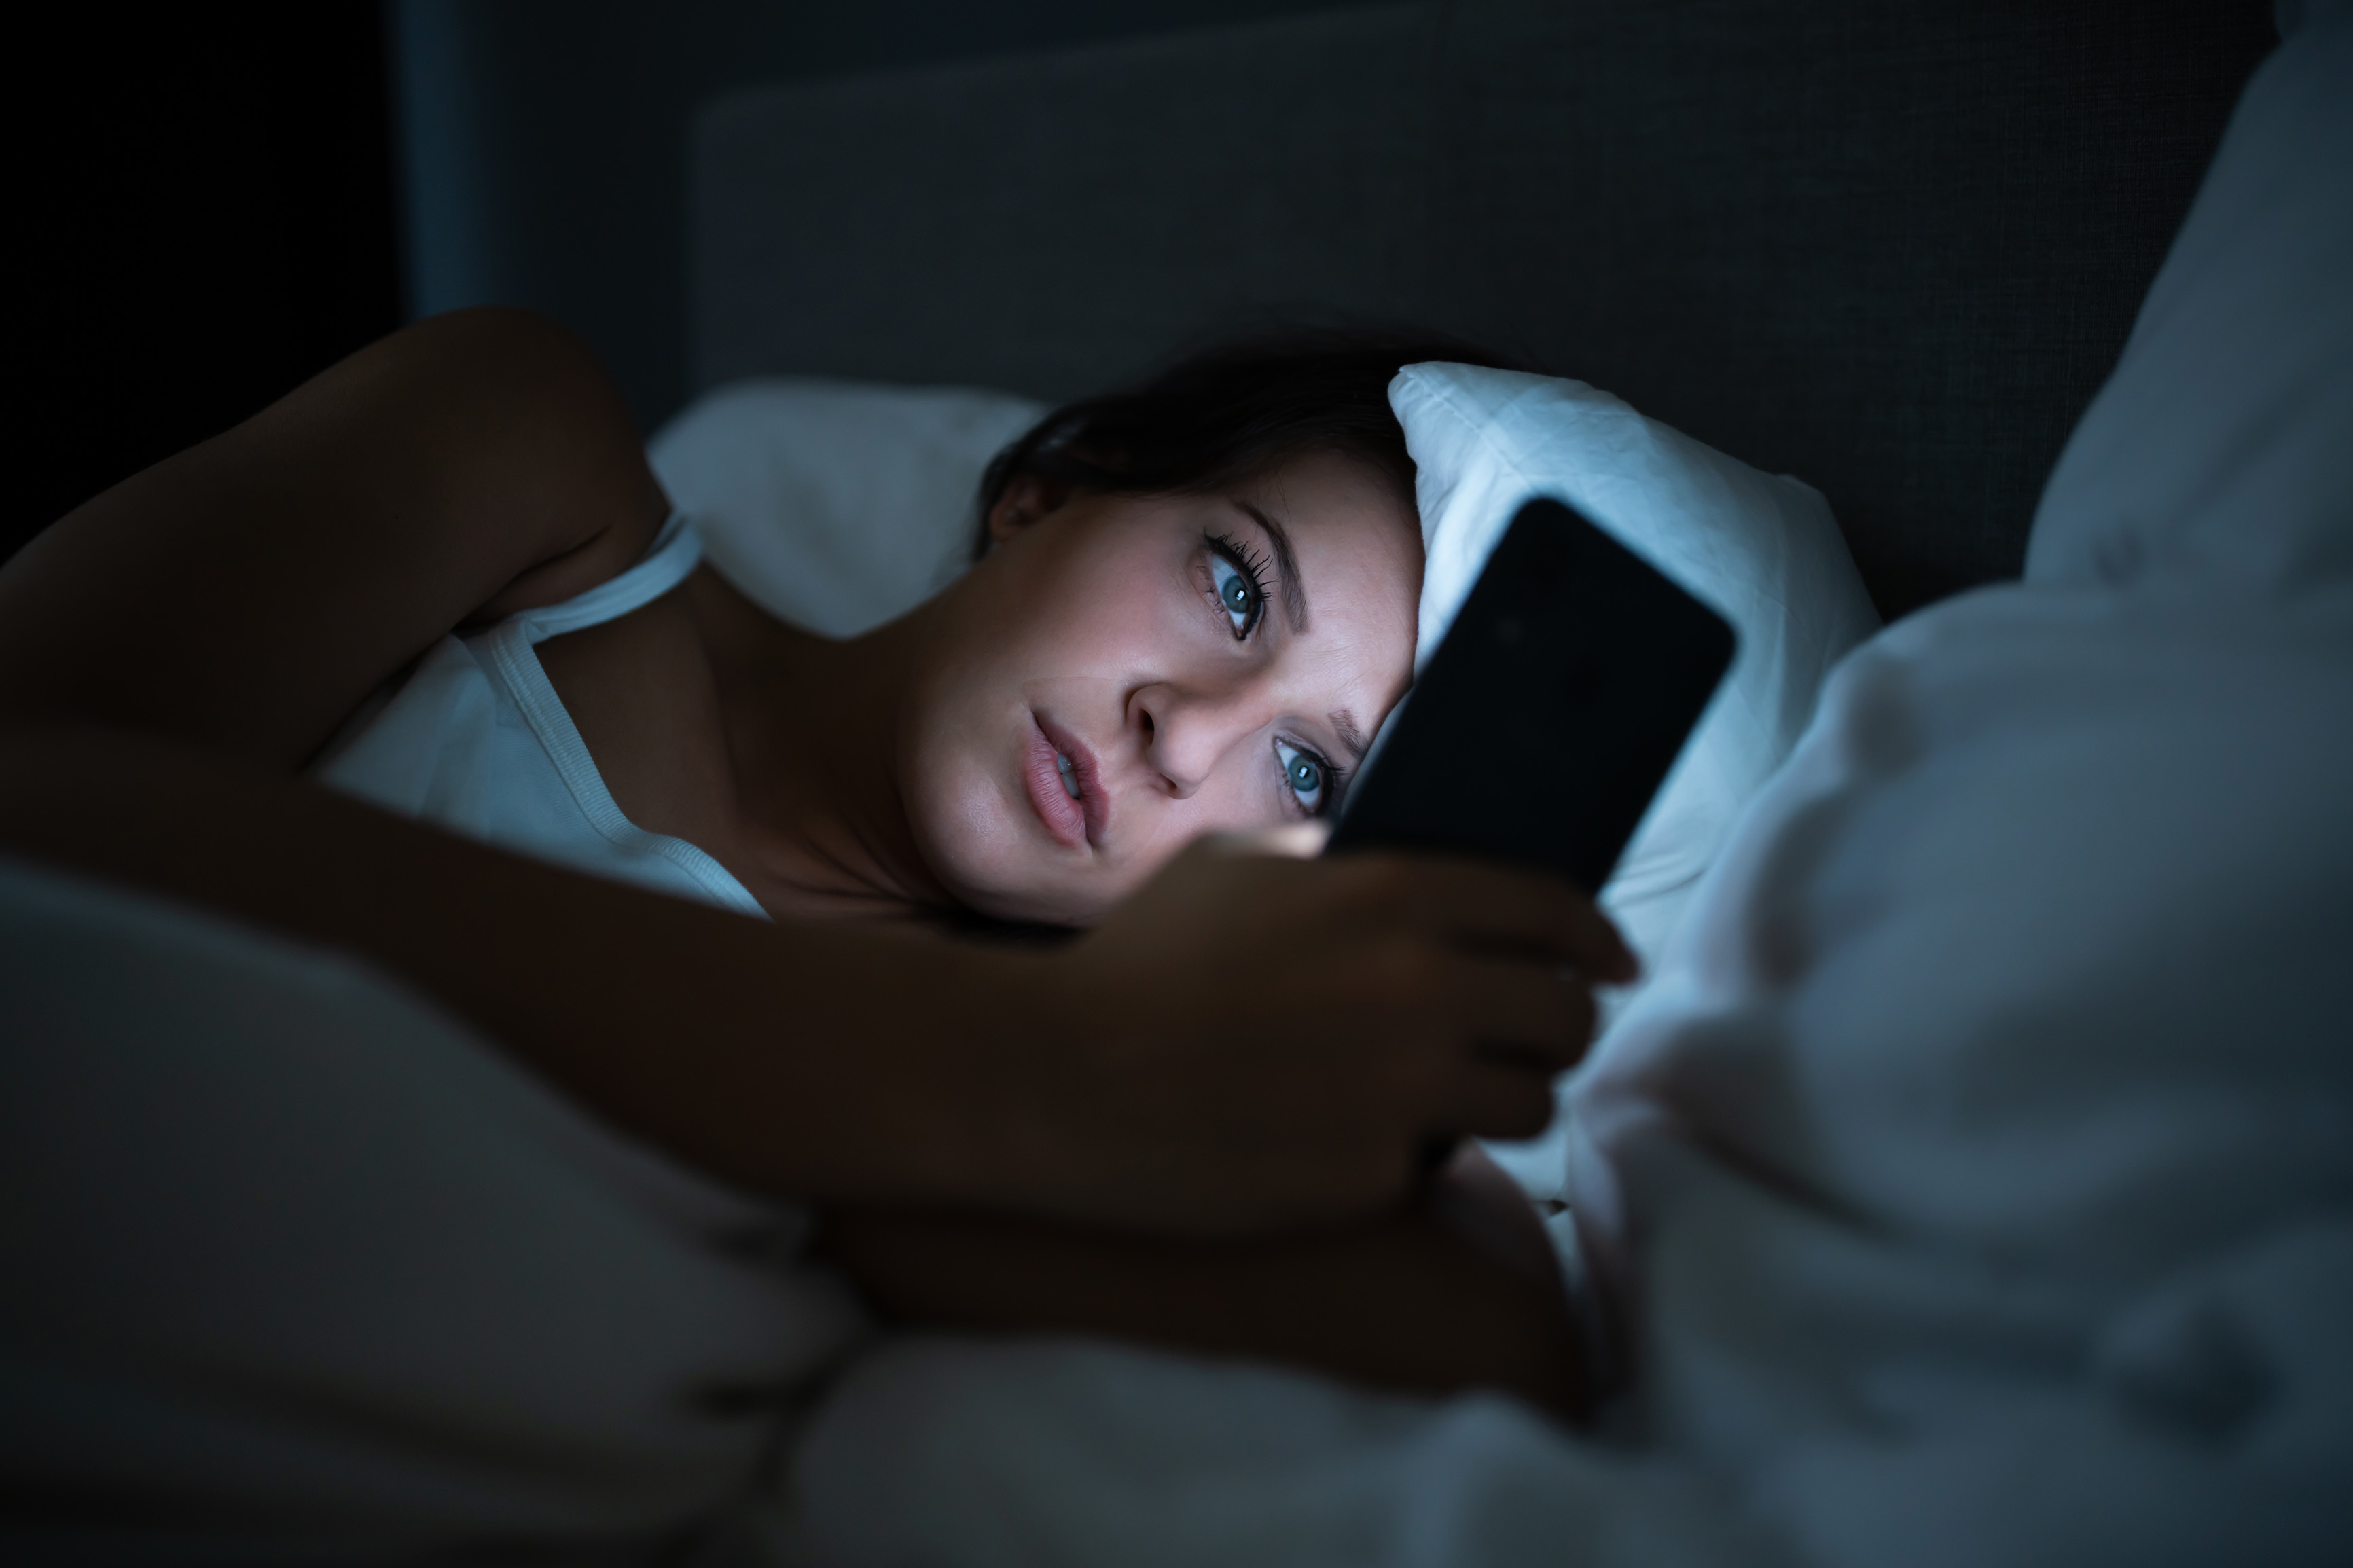 Woman In Bed With Mobile Phone At Night